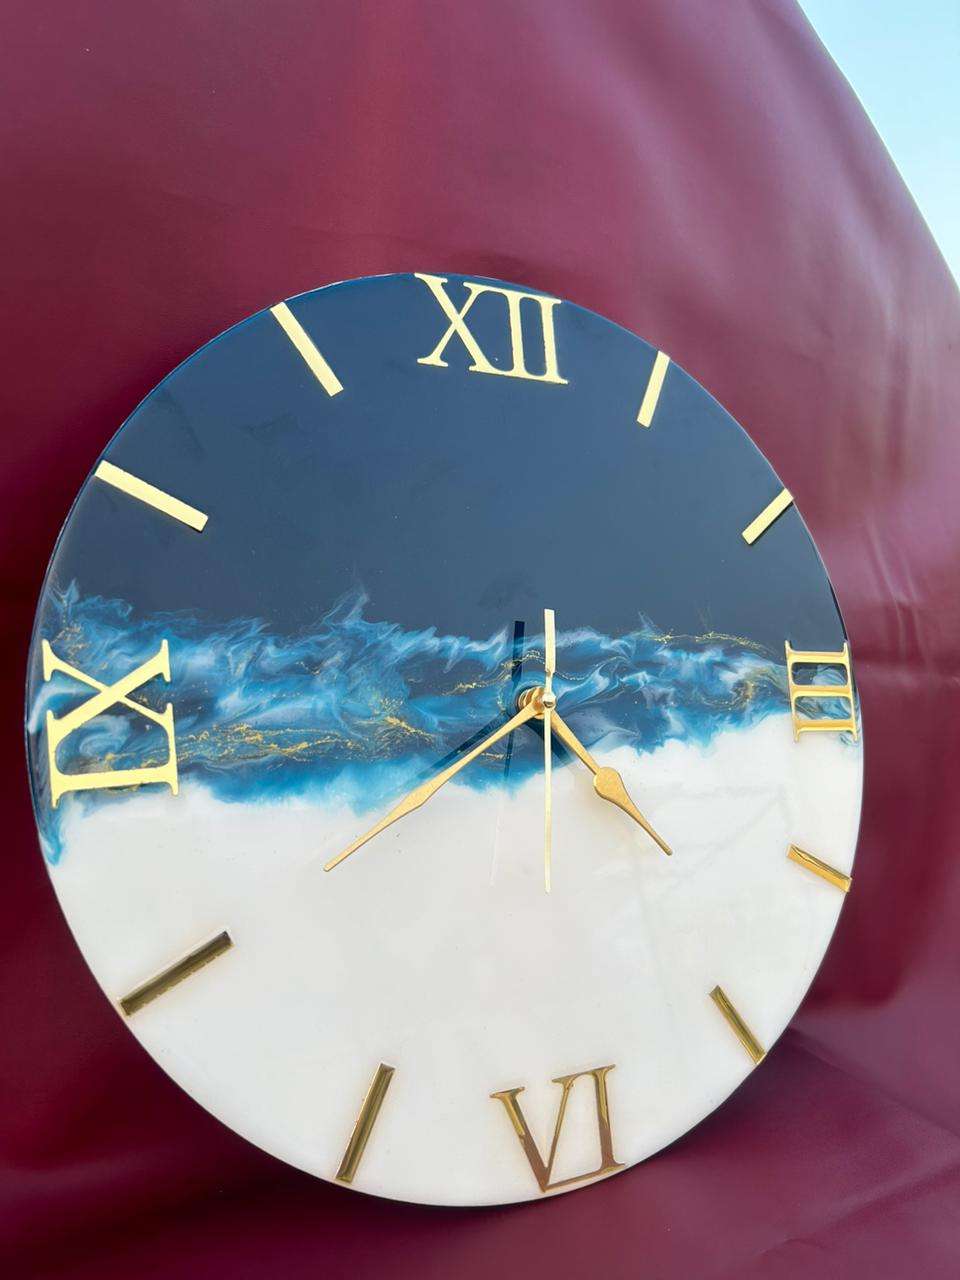 How to make an Epoxy Resin Ocean/Beach clock using a Silicone mold - YouTube